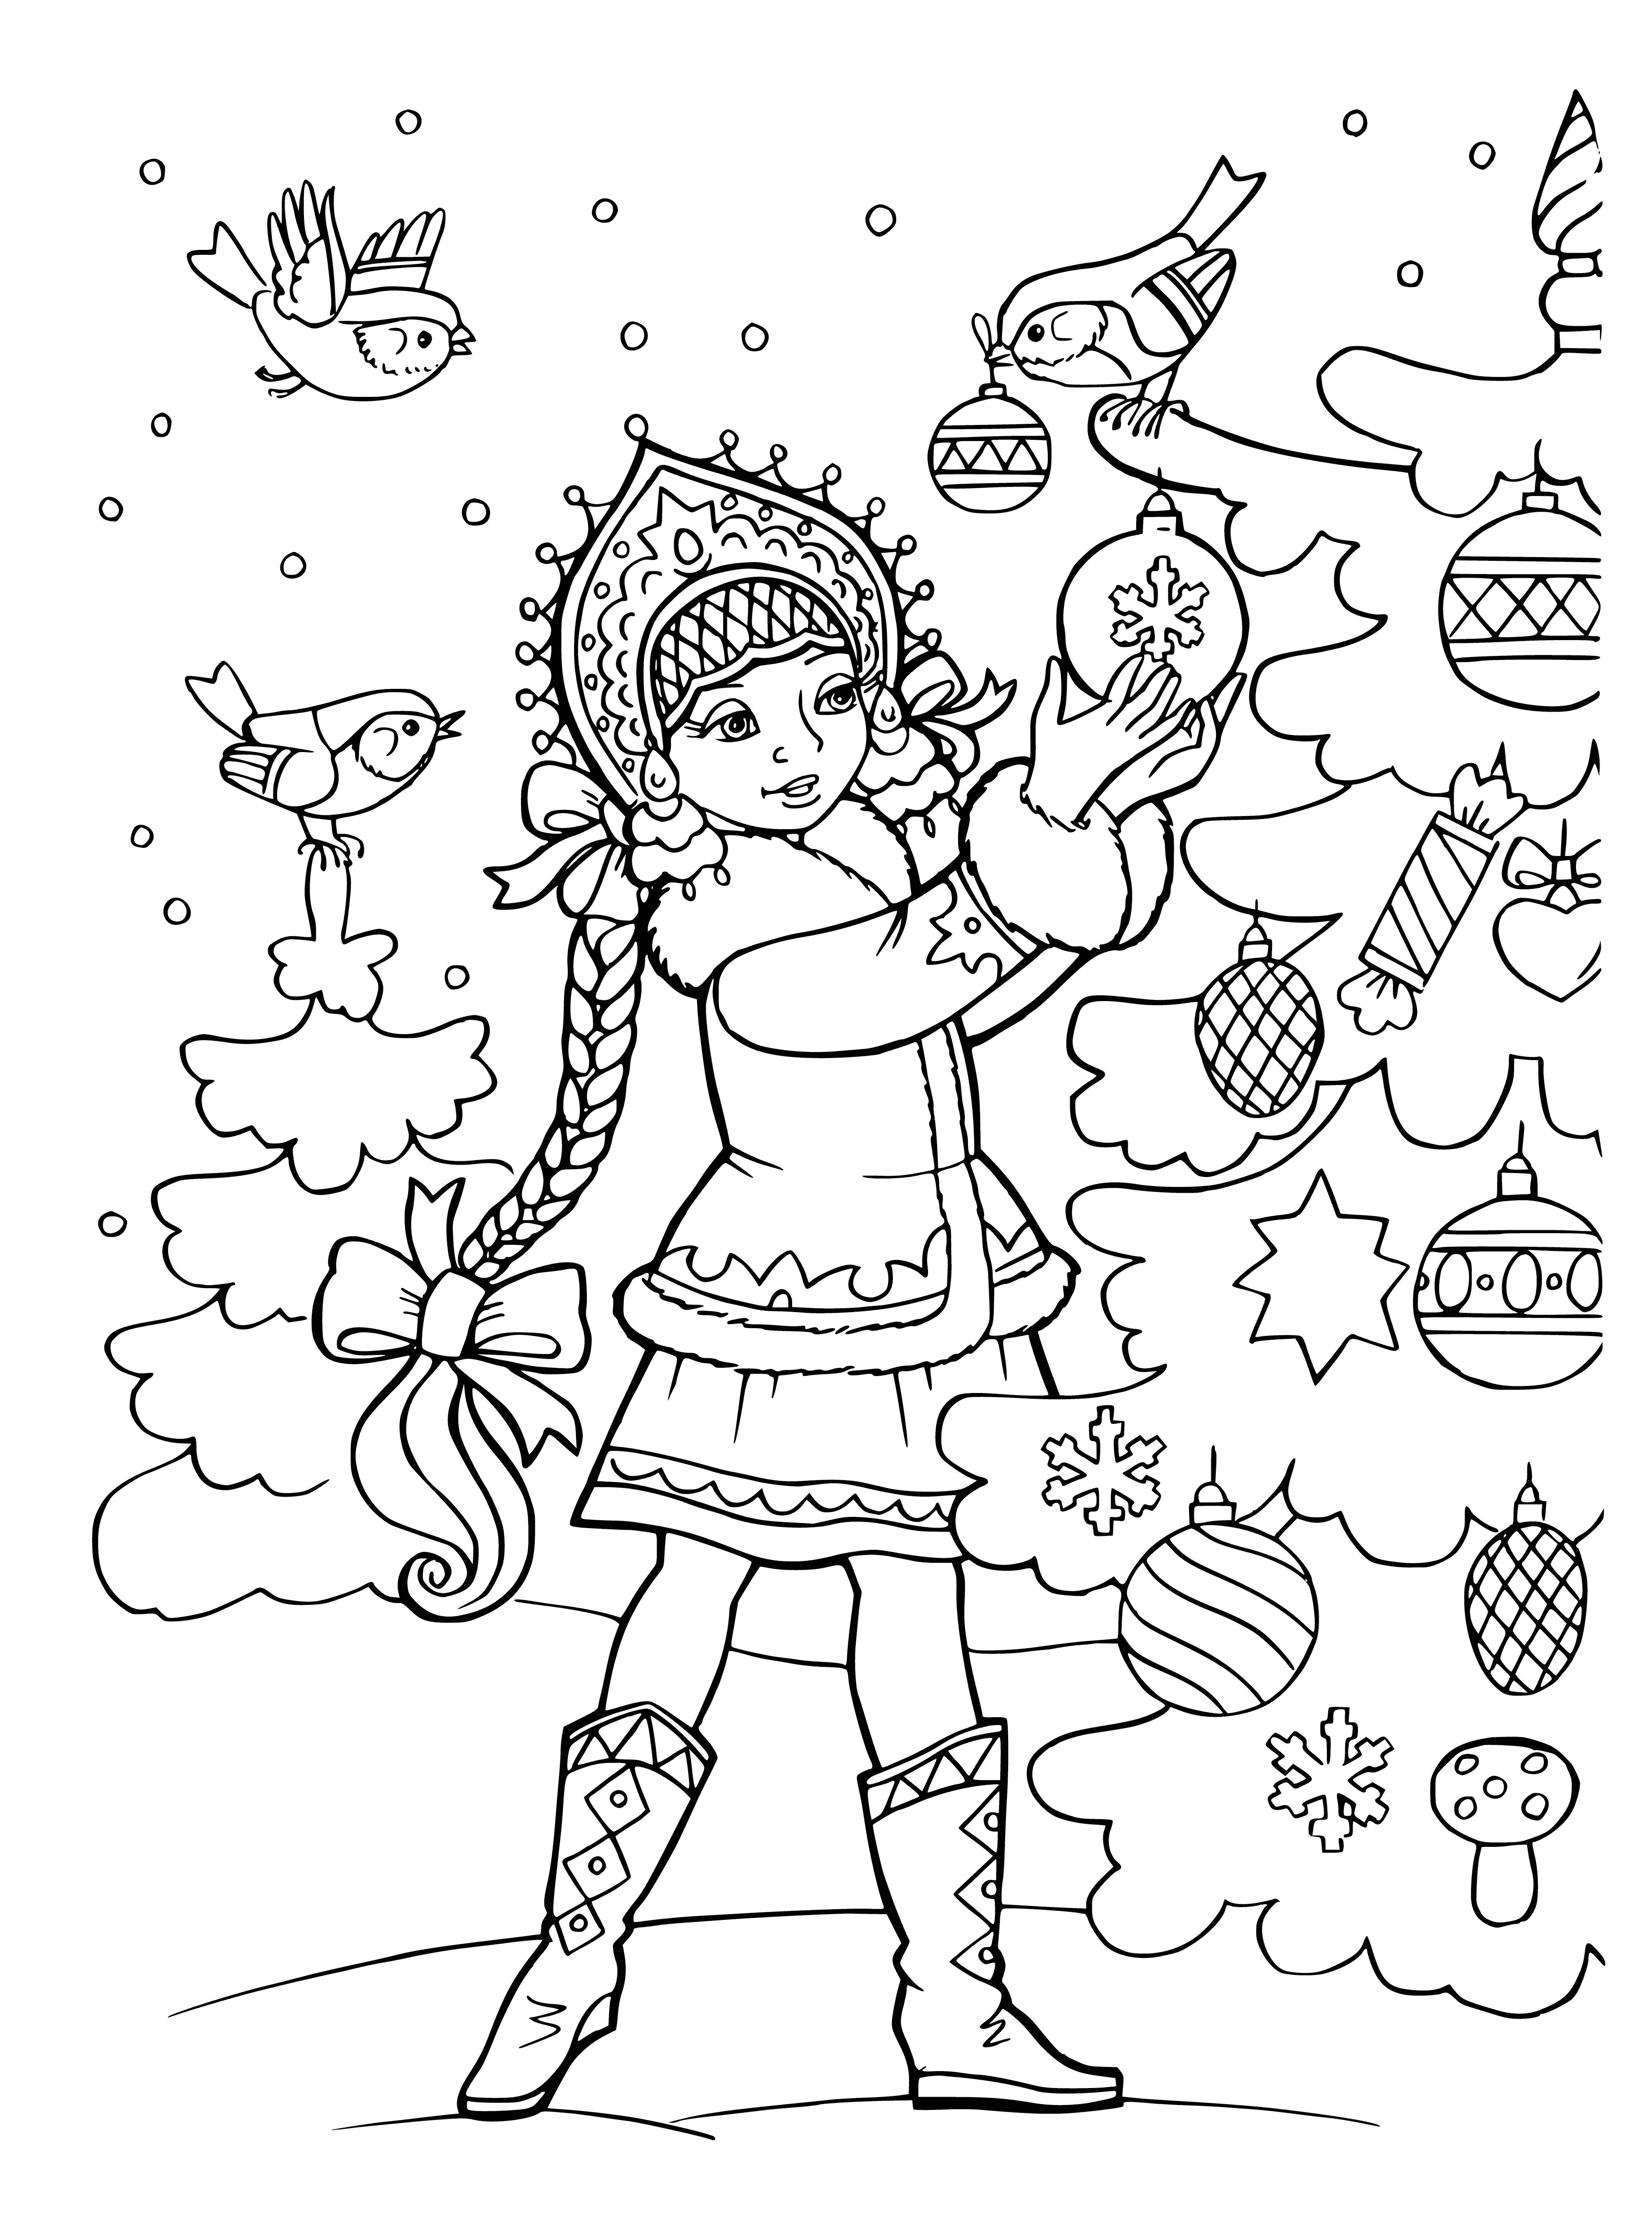 coloring page: The Snow Maiden has white hair, blue scarf, white dress and a star in her hand. She is near a Christmas tree.